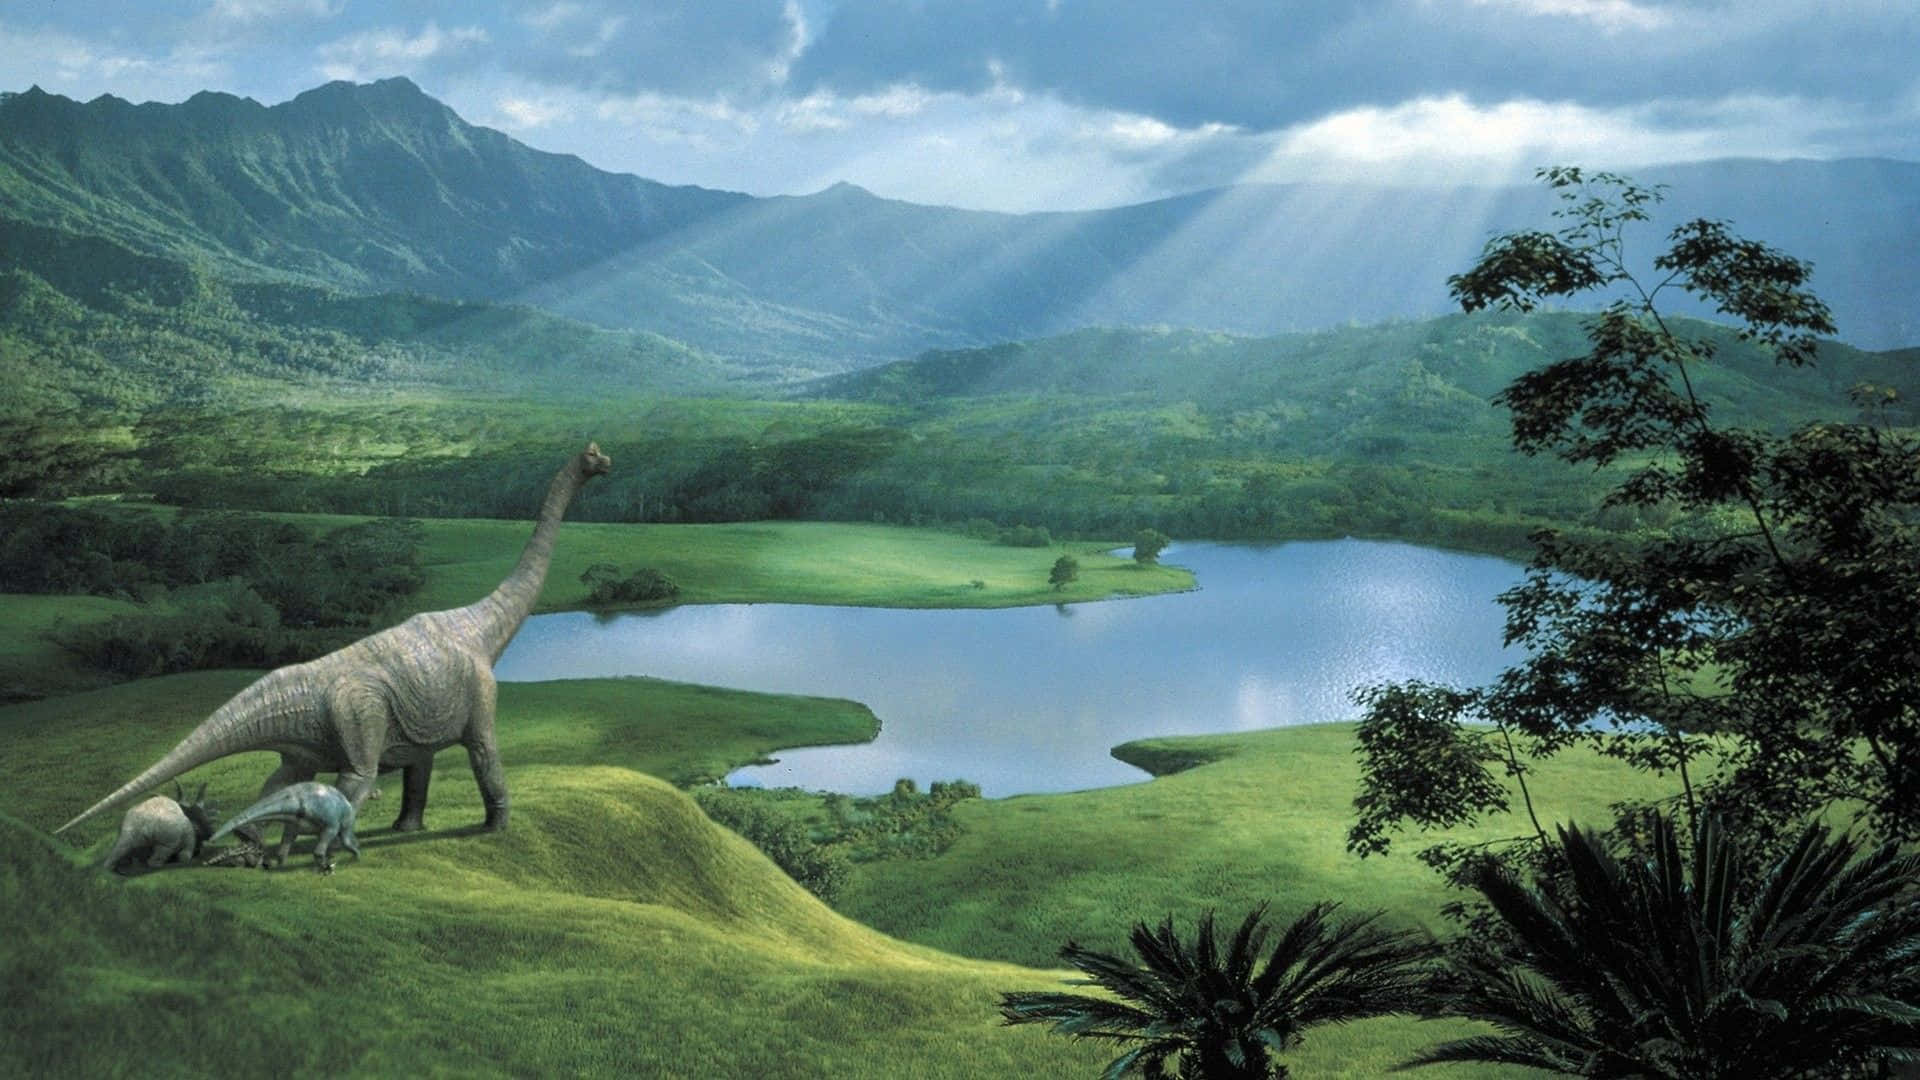 A Dinosaur Is Standing In A Grassy Field Near A Lake